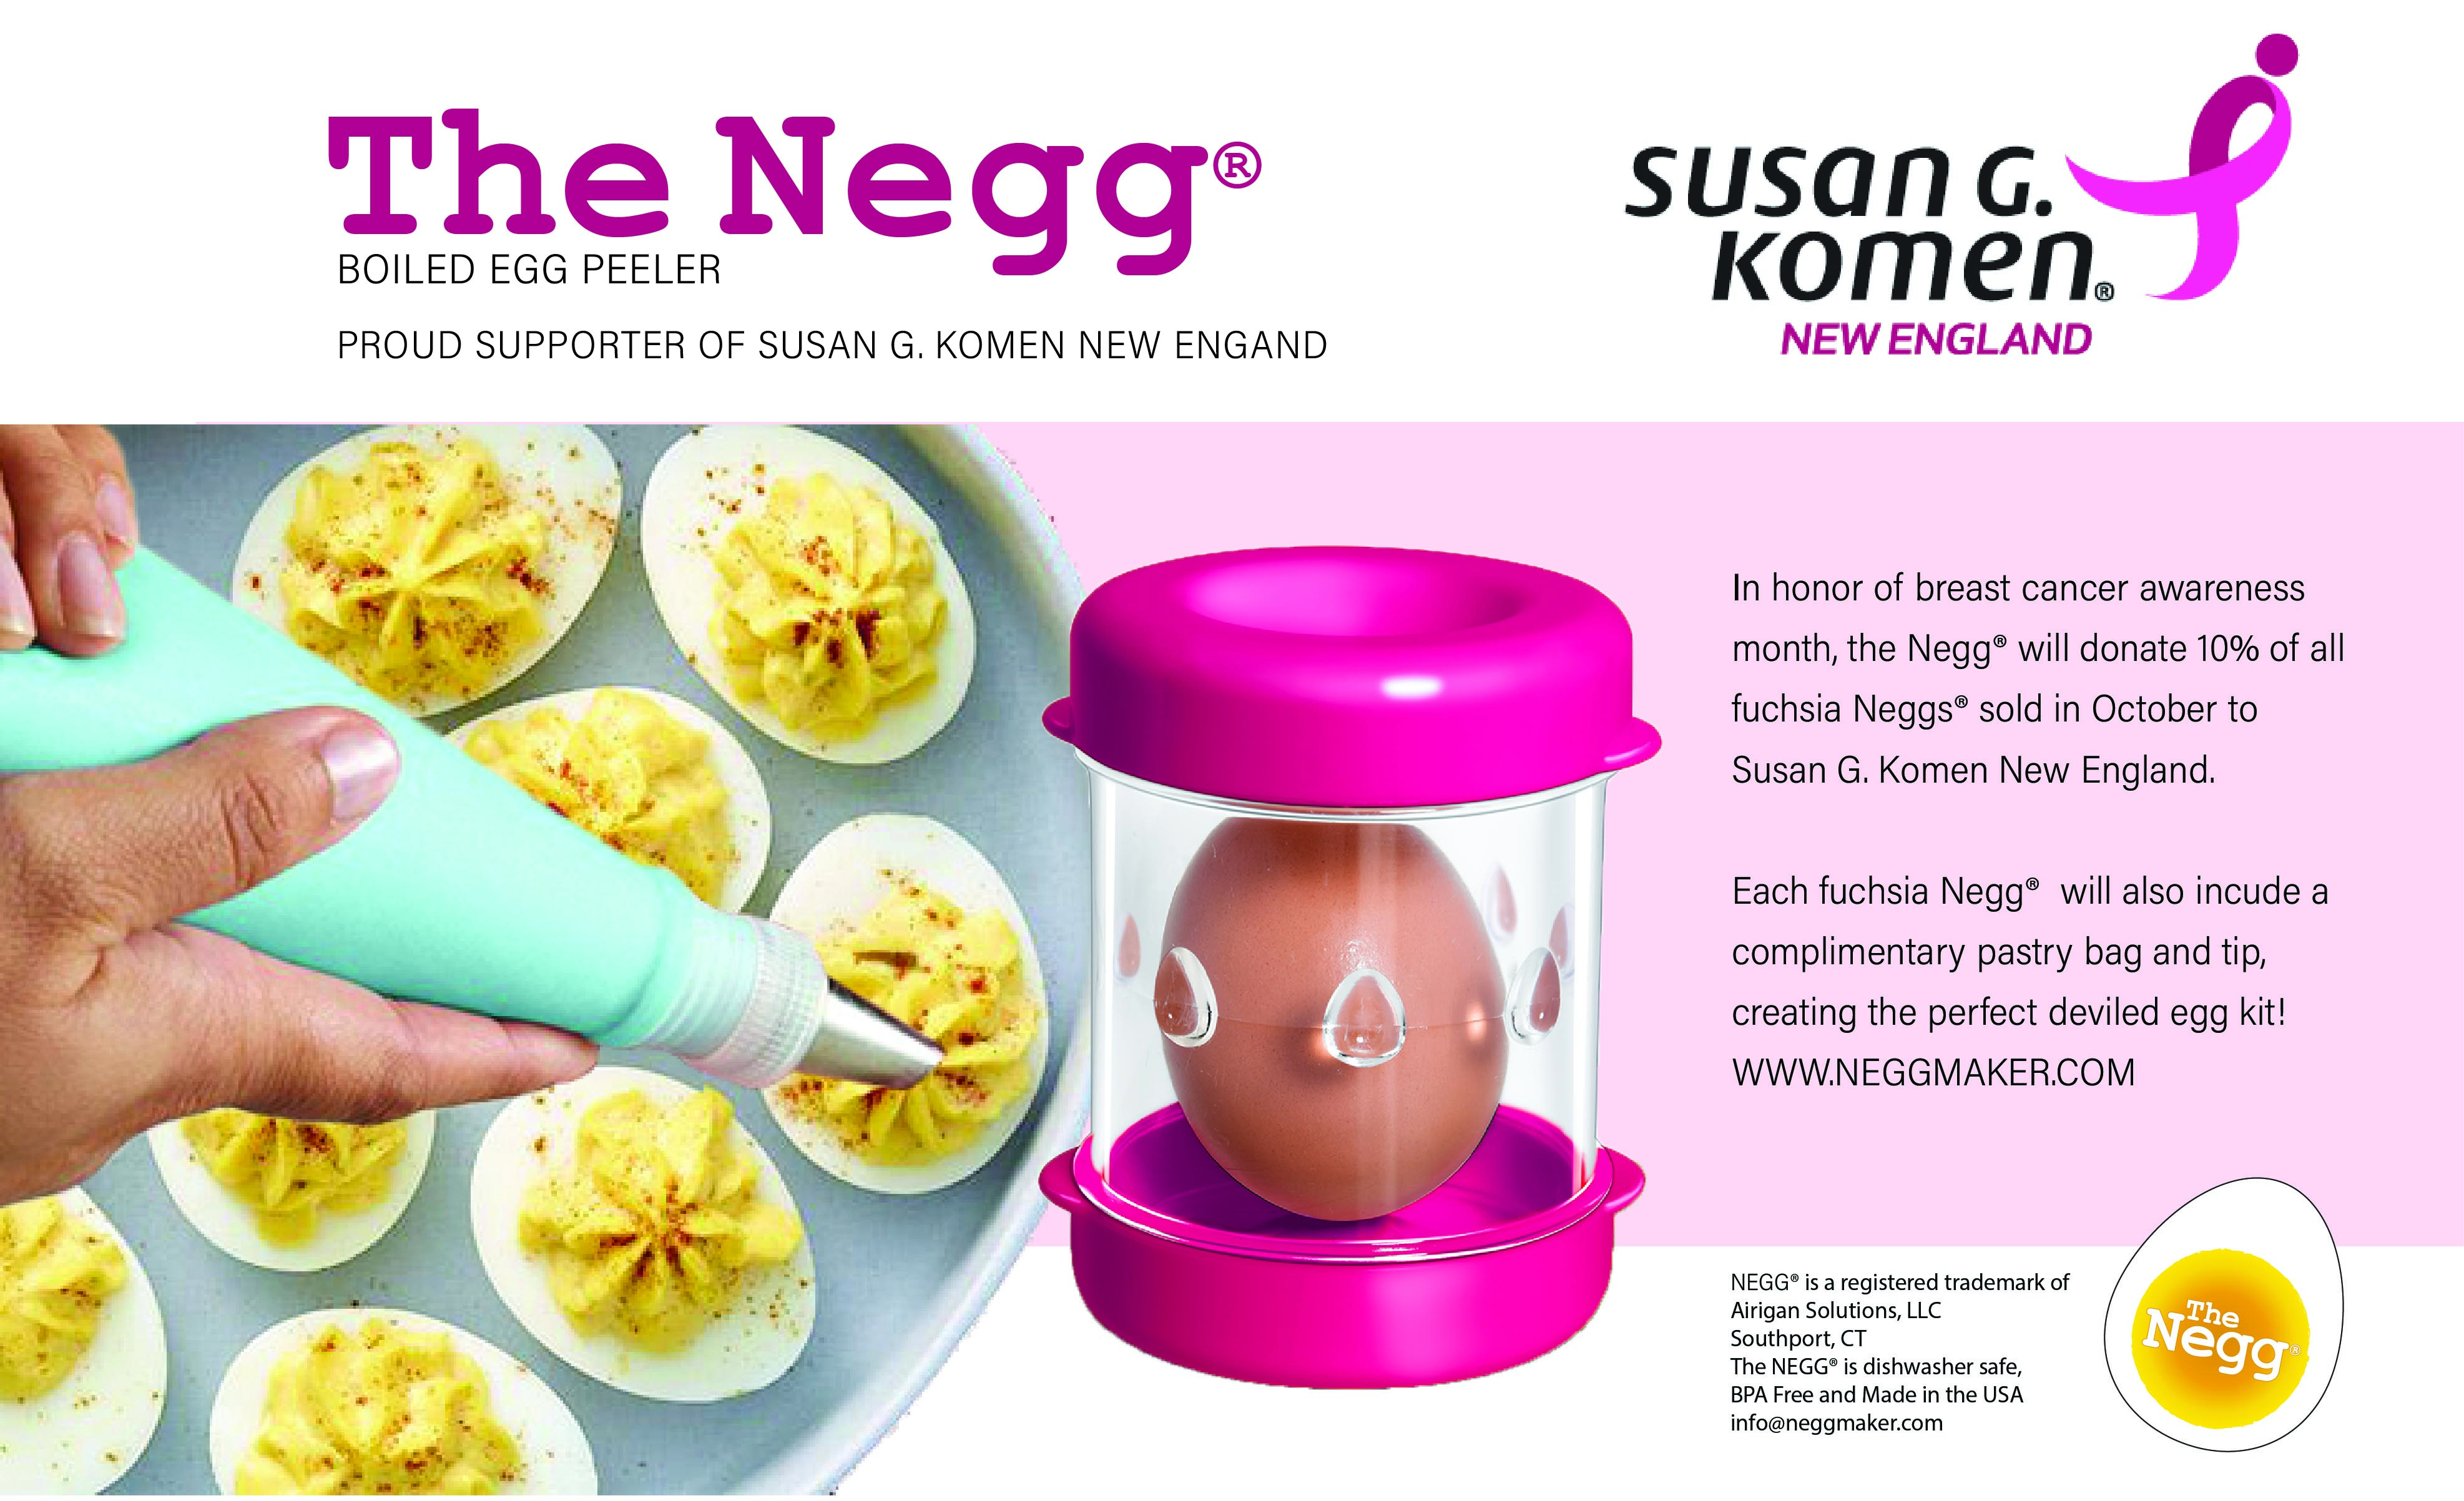 The Innovative Egg Peeler Negg® Celebrates Its 2nd Anniversary With a  Breast Cancer Fundraising Initiative